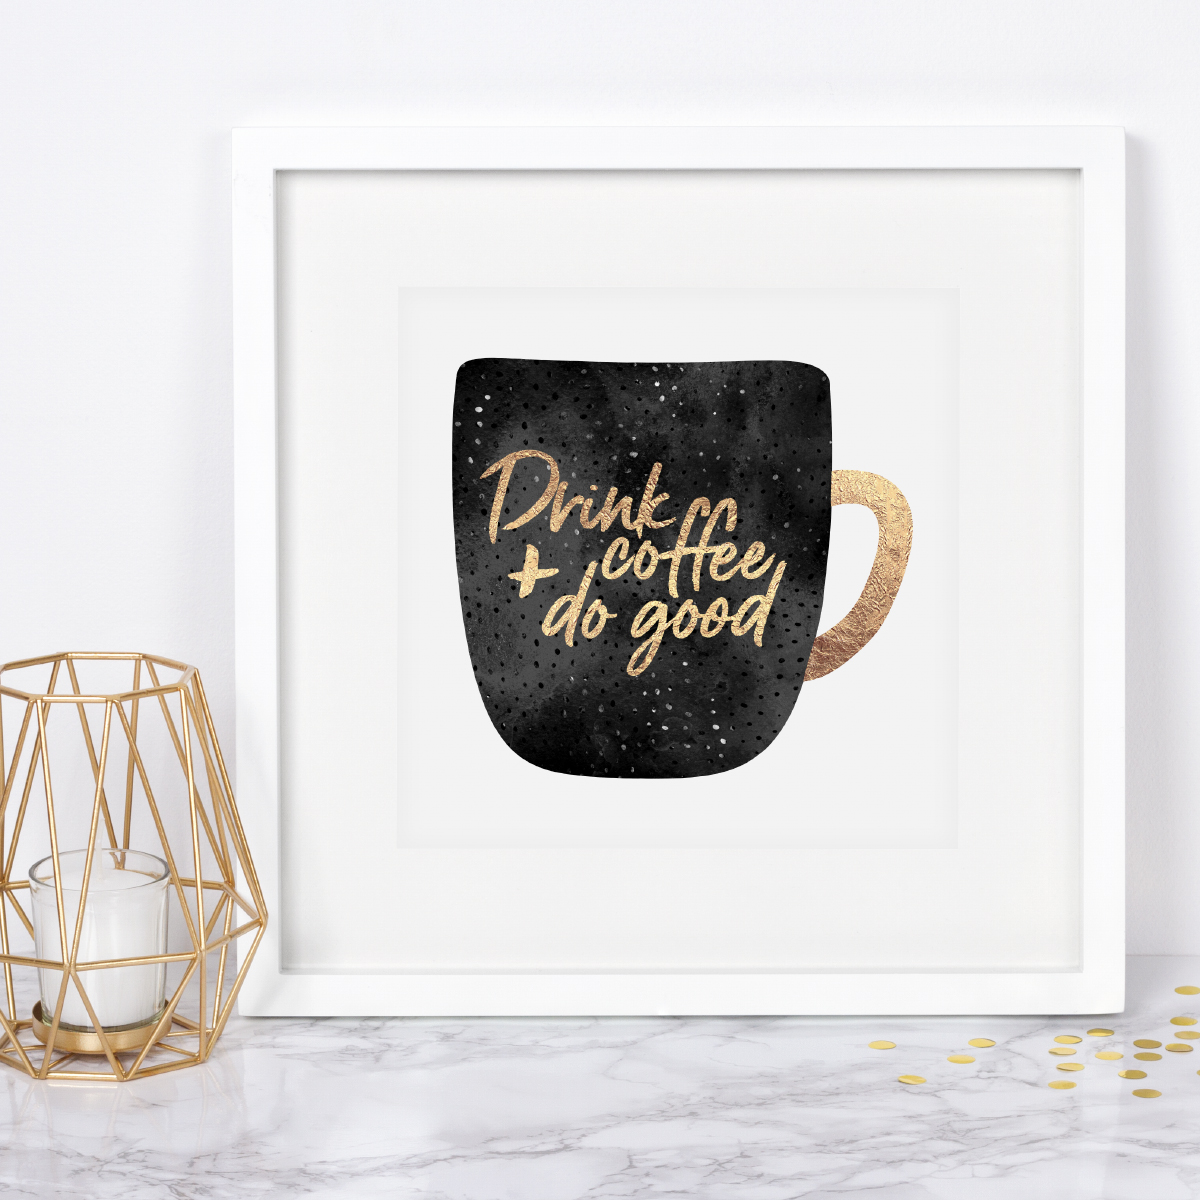 https://society6.com/product/drink-coffee-and-do-good-1_print#s6-7109745p4a1v45